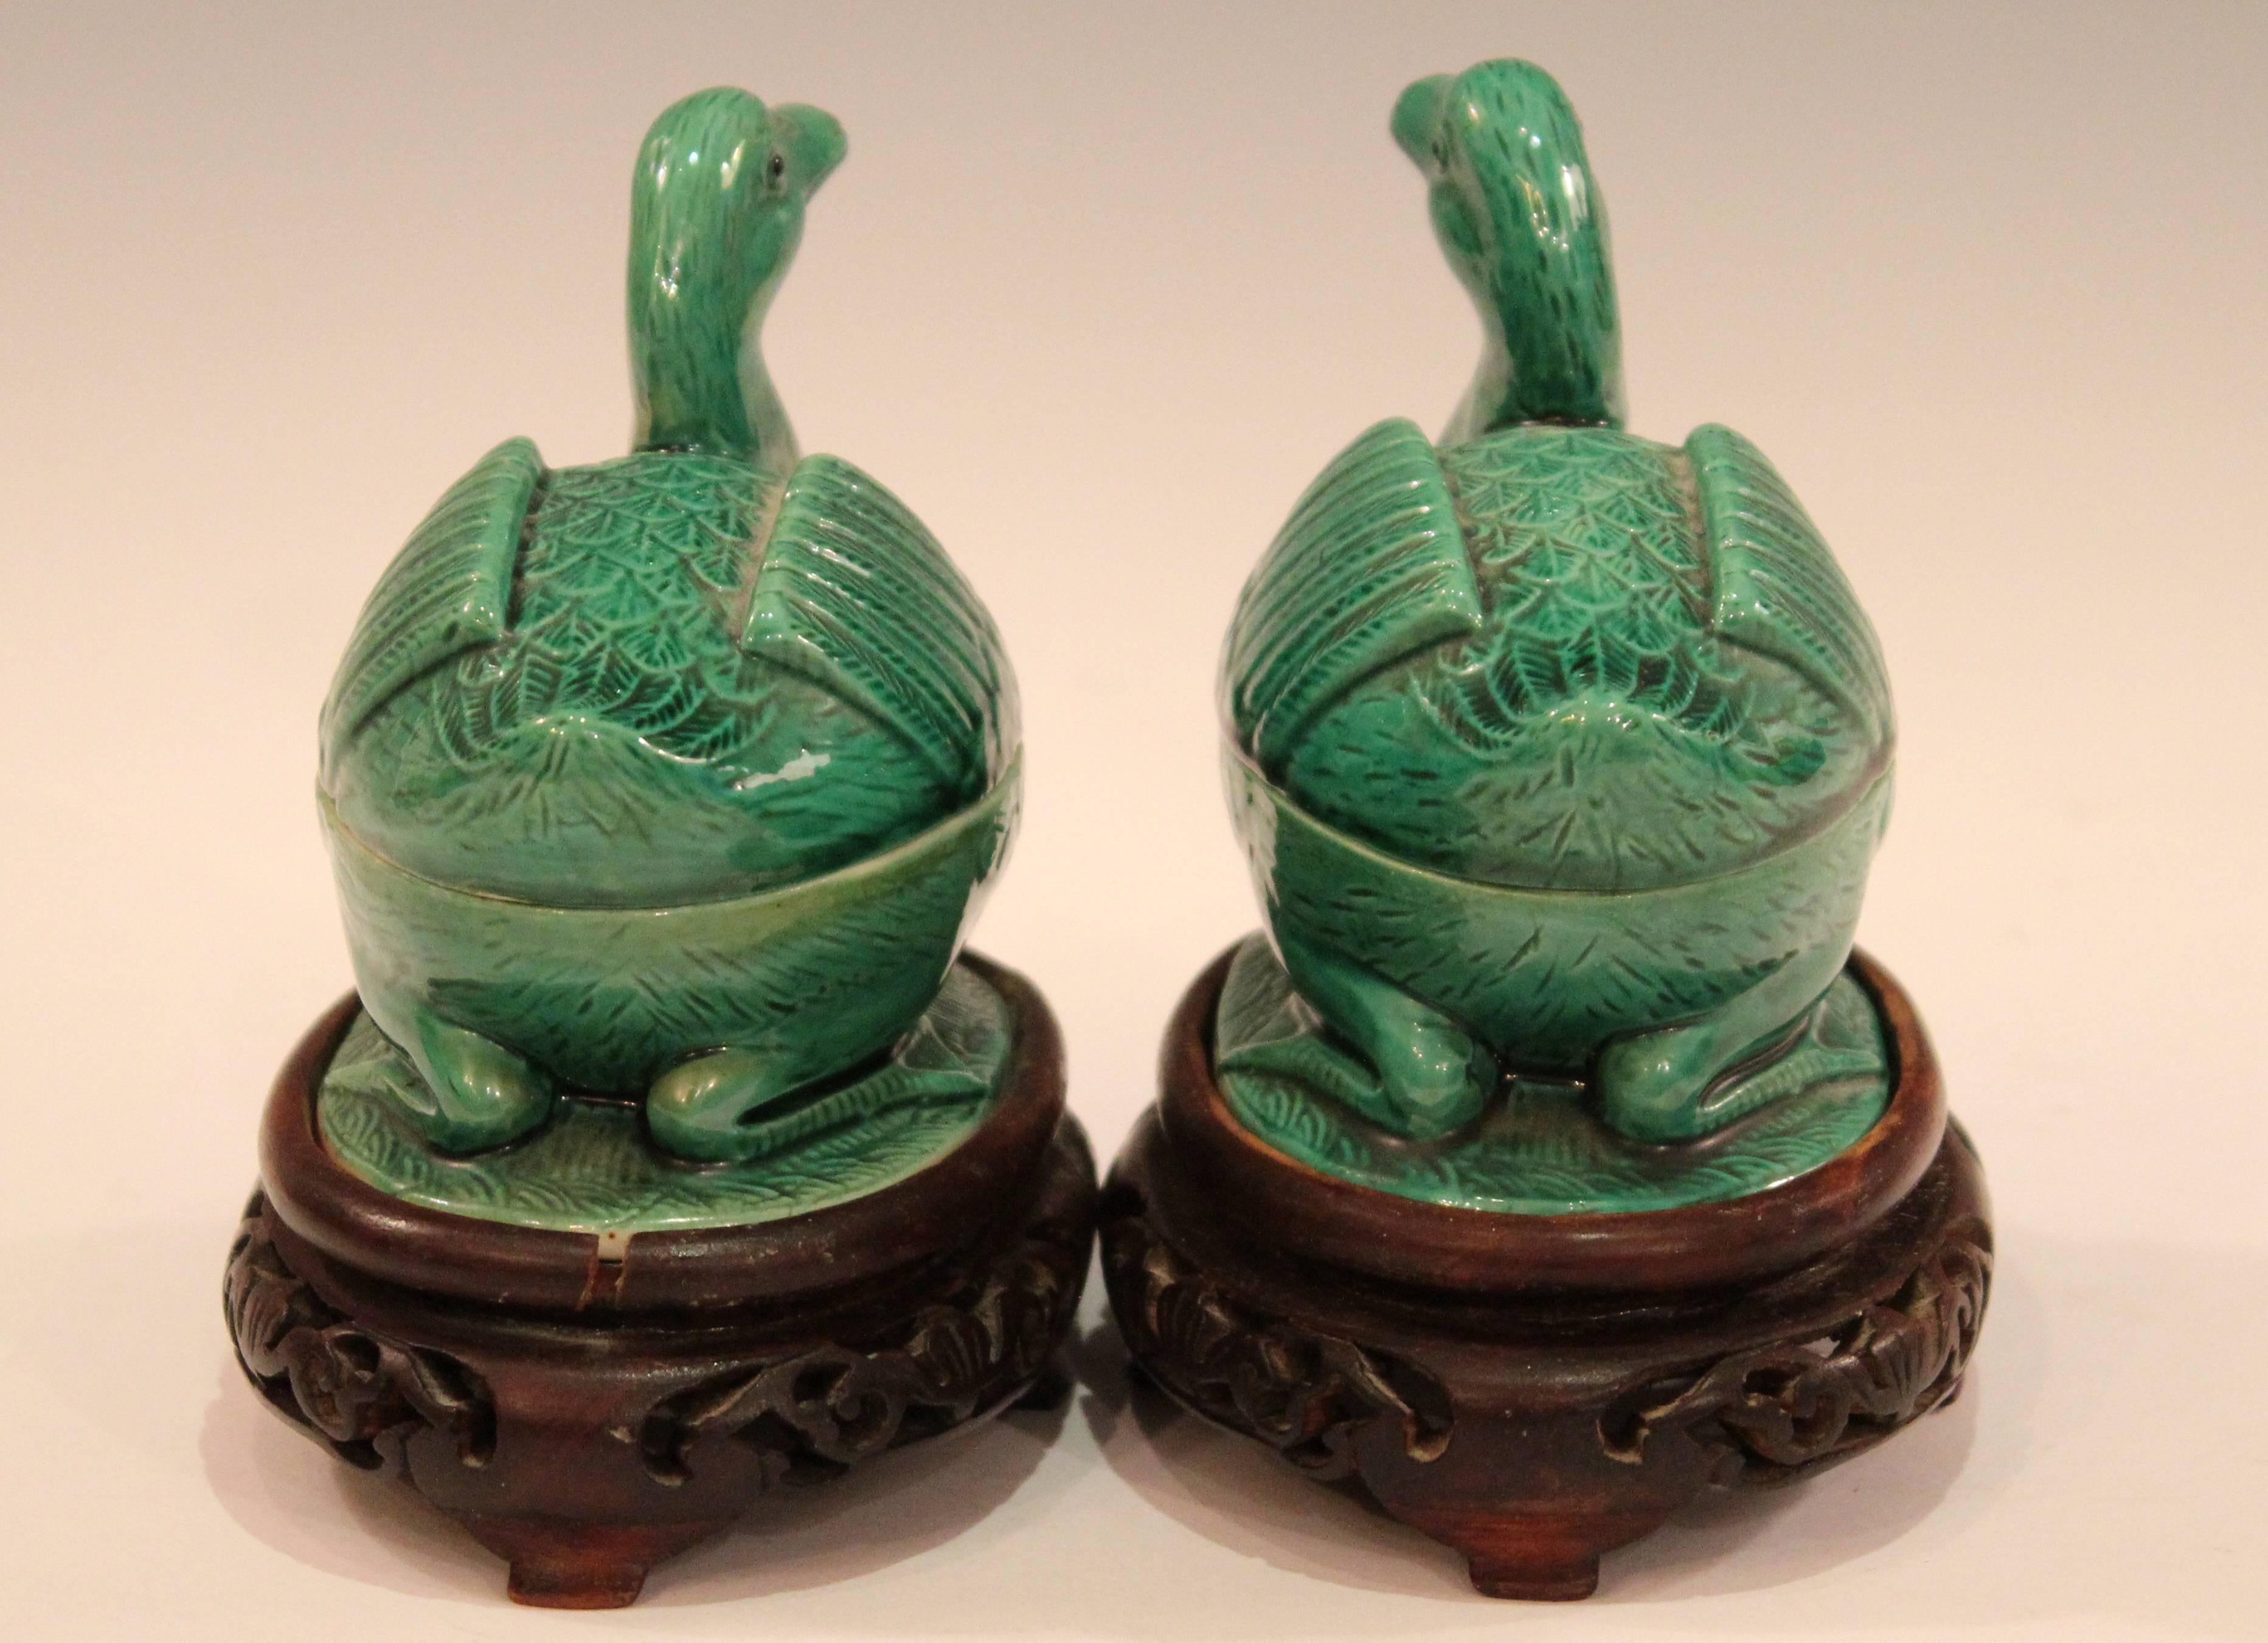 20th Century Pair of Chinese Porcelain Bird Figure Covered Boxes Ducks Geese Marked